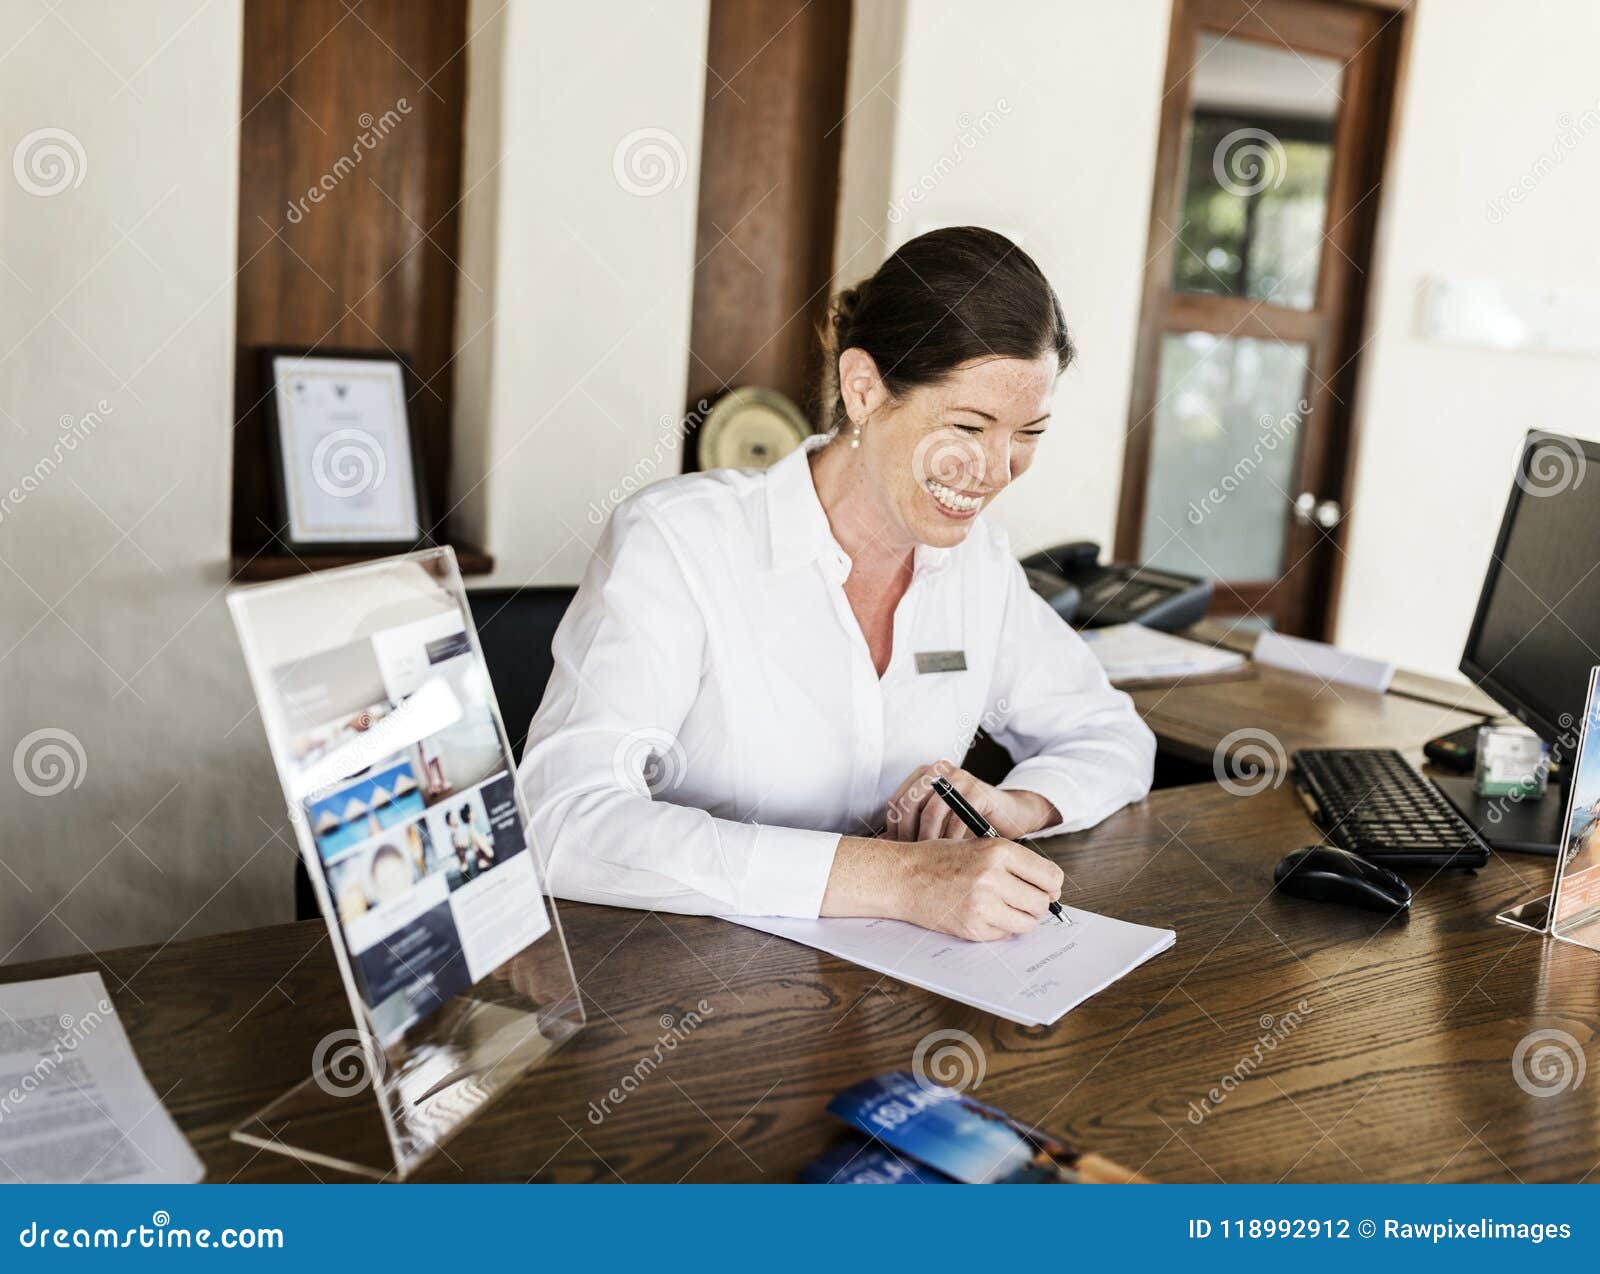 Receptionist Working At The Front Desk Stock Photo Image Of